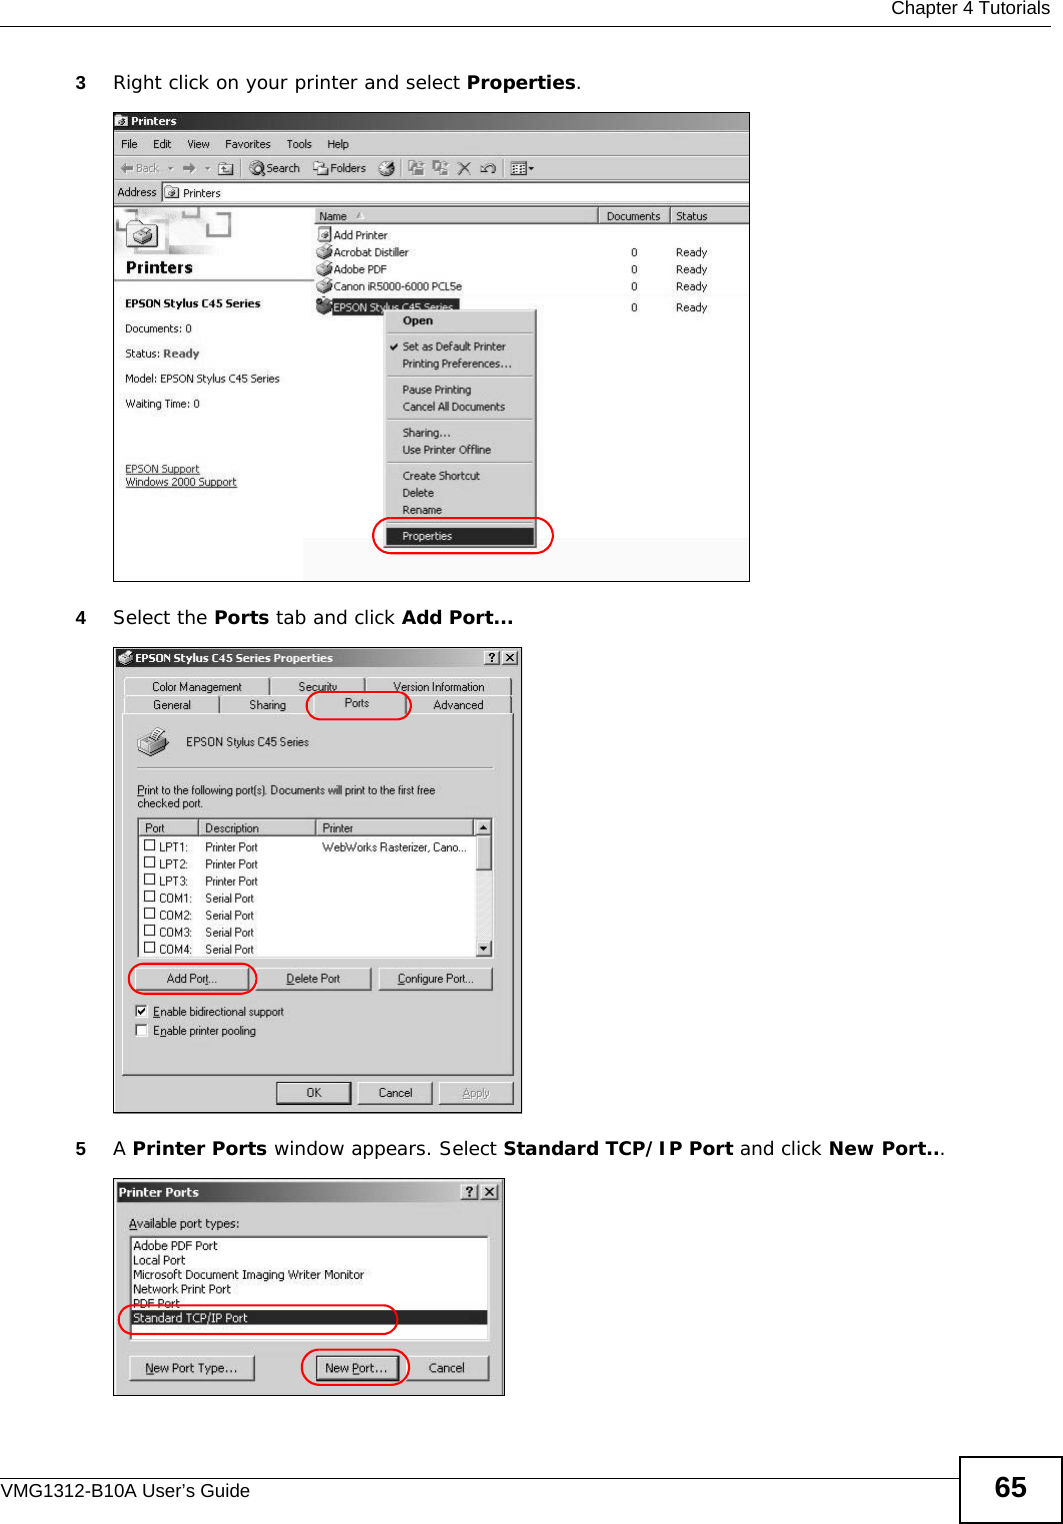  Chapter 4 TutorialsVMG1312-B10A User’s Guide 653Right click on your printer and select Properties.Tutorial: Open Printer Properties4Select the Ports tab and click Add Port...Tutorial: Printer Properties Window5A Printer Ports window appears. Select Standard TCP/IP Port and click New Port...Tutorial: Add a Port  Window